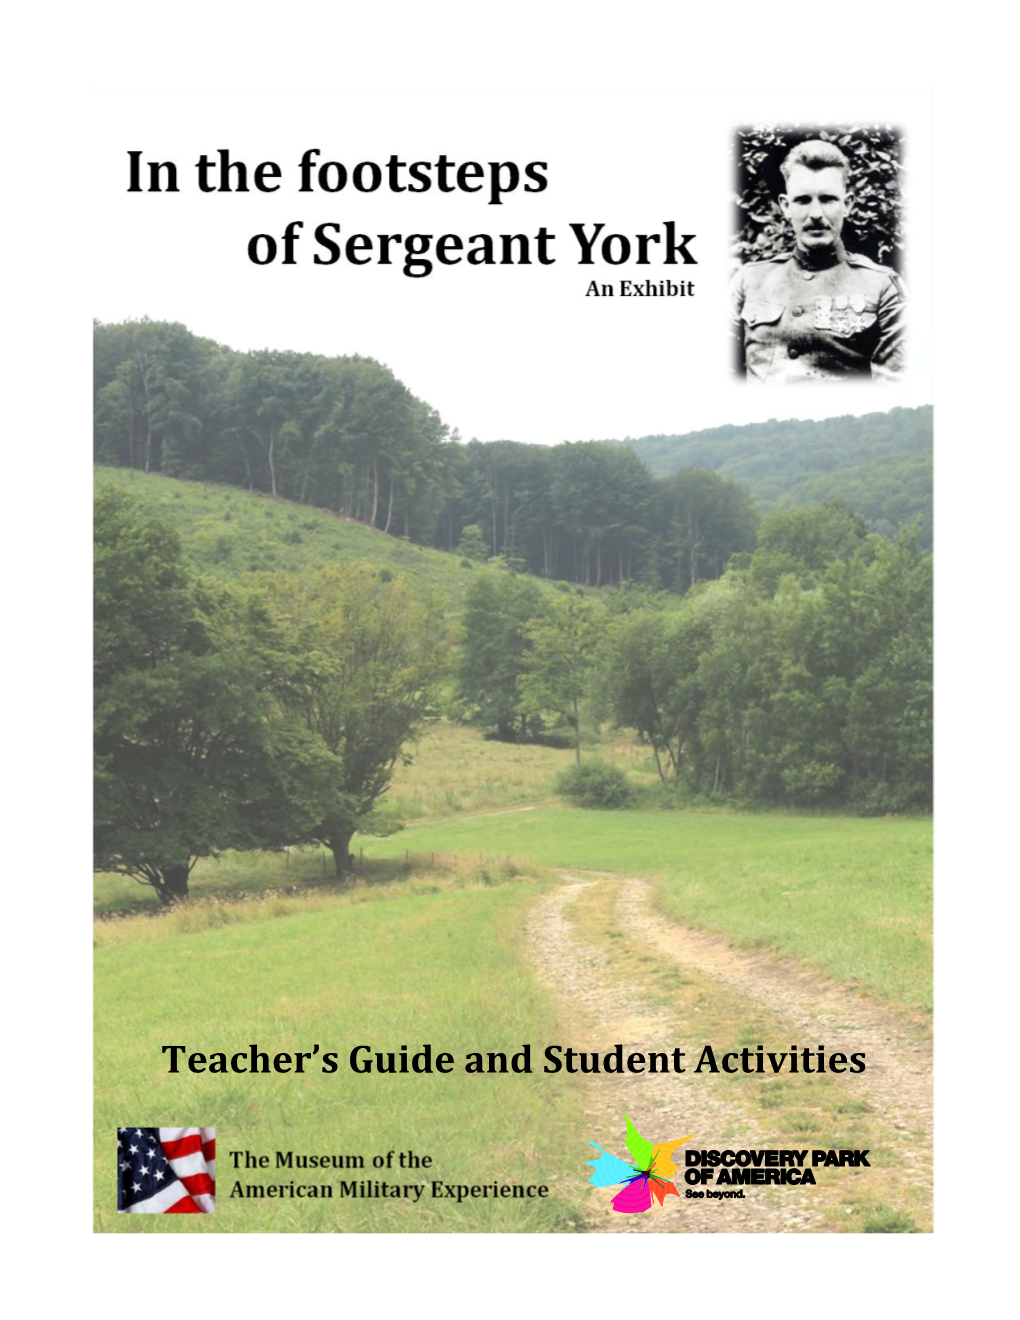 Teacher's Guide and Student Activities Developed by Discovery Park Of